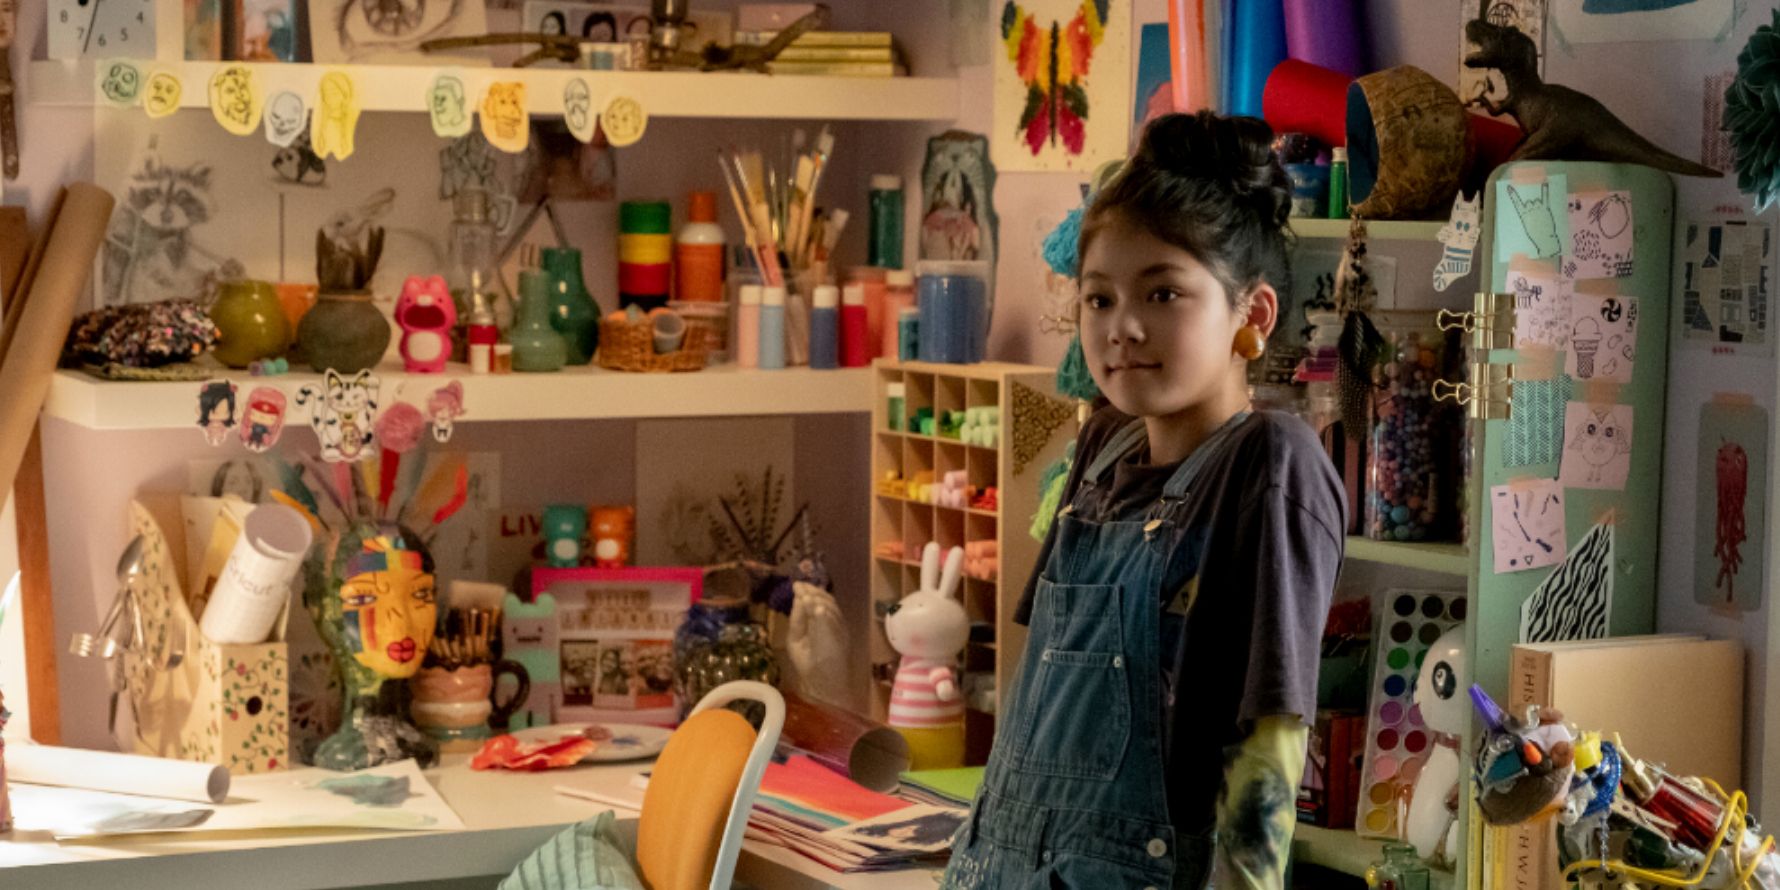 Claudia leans on her cluttered art desk in The Baby-Sitters Club